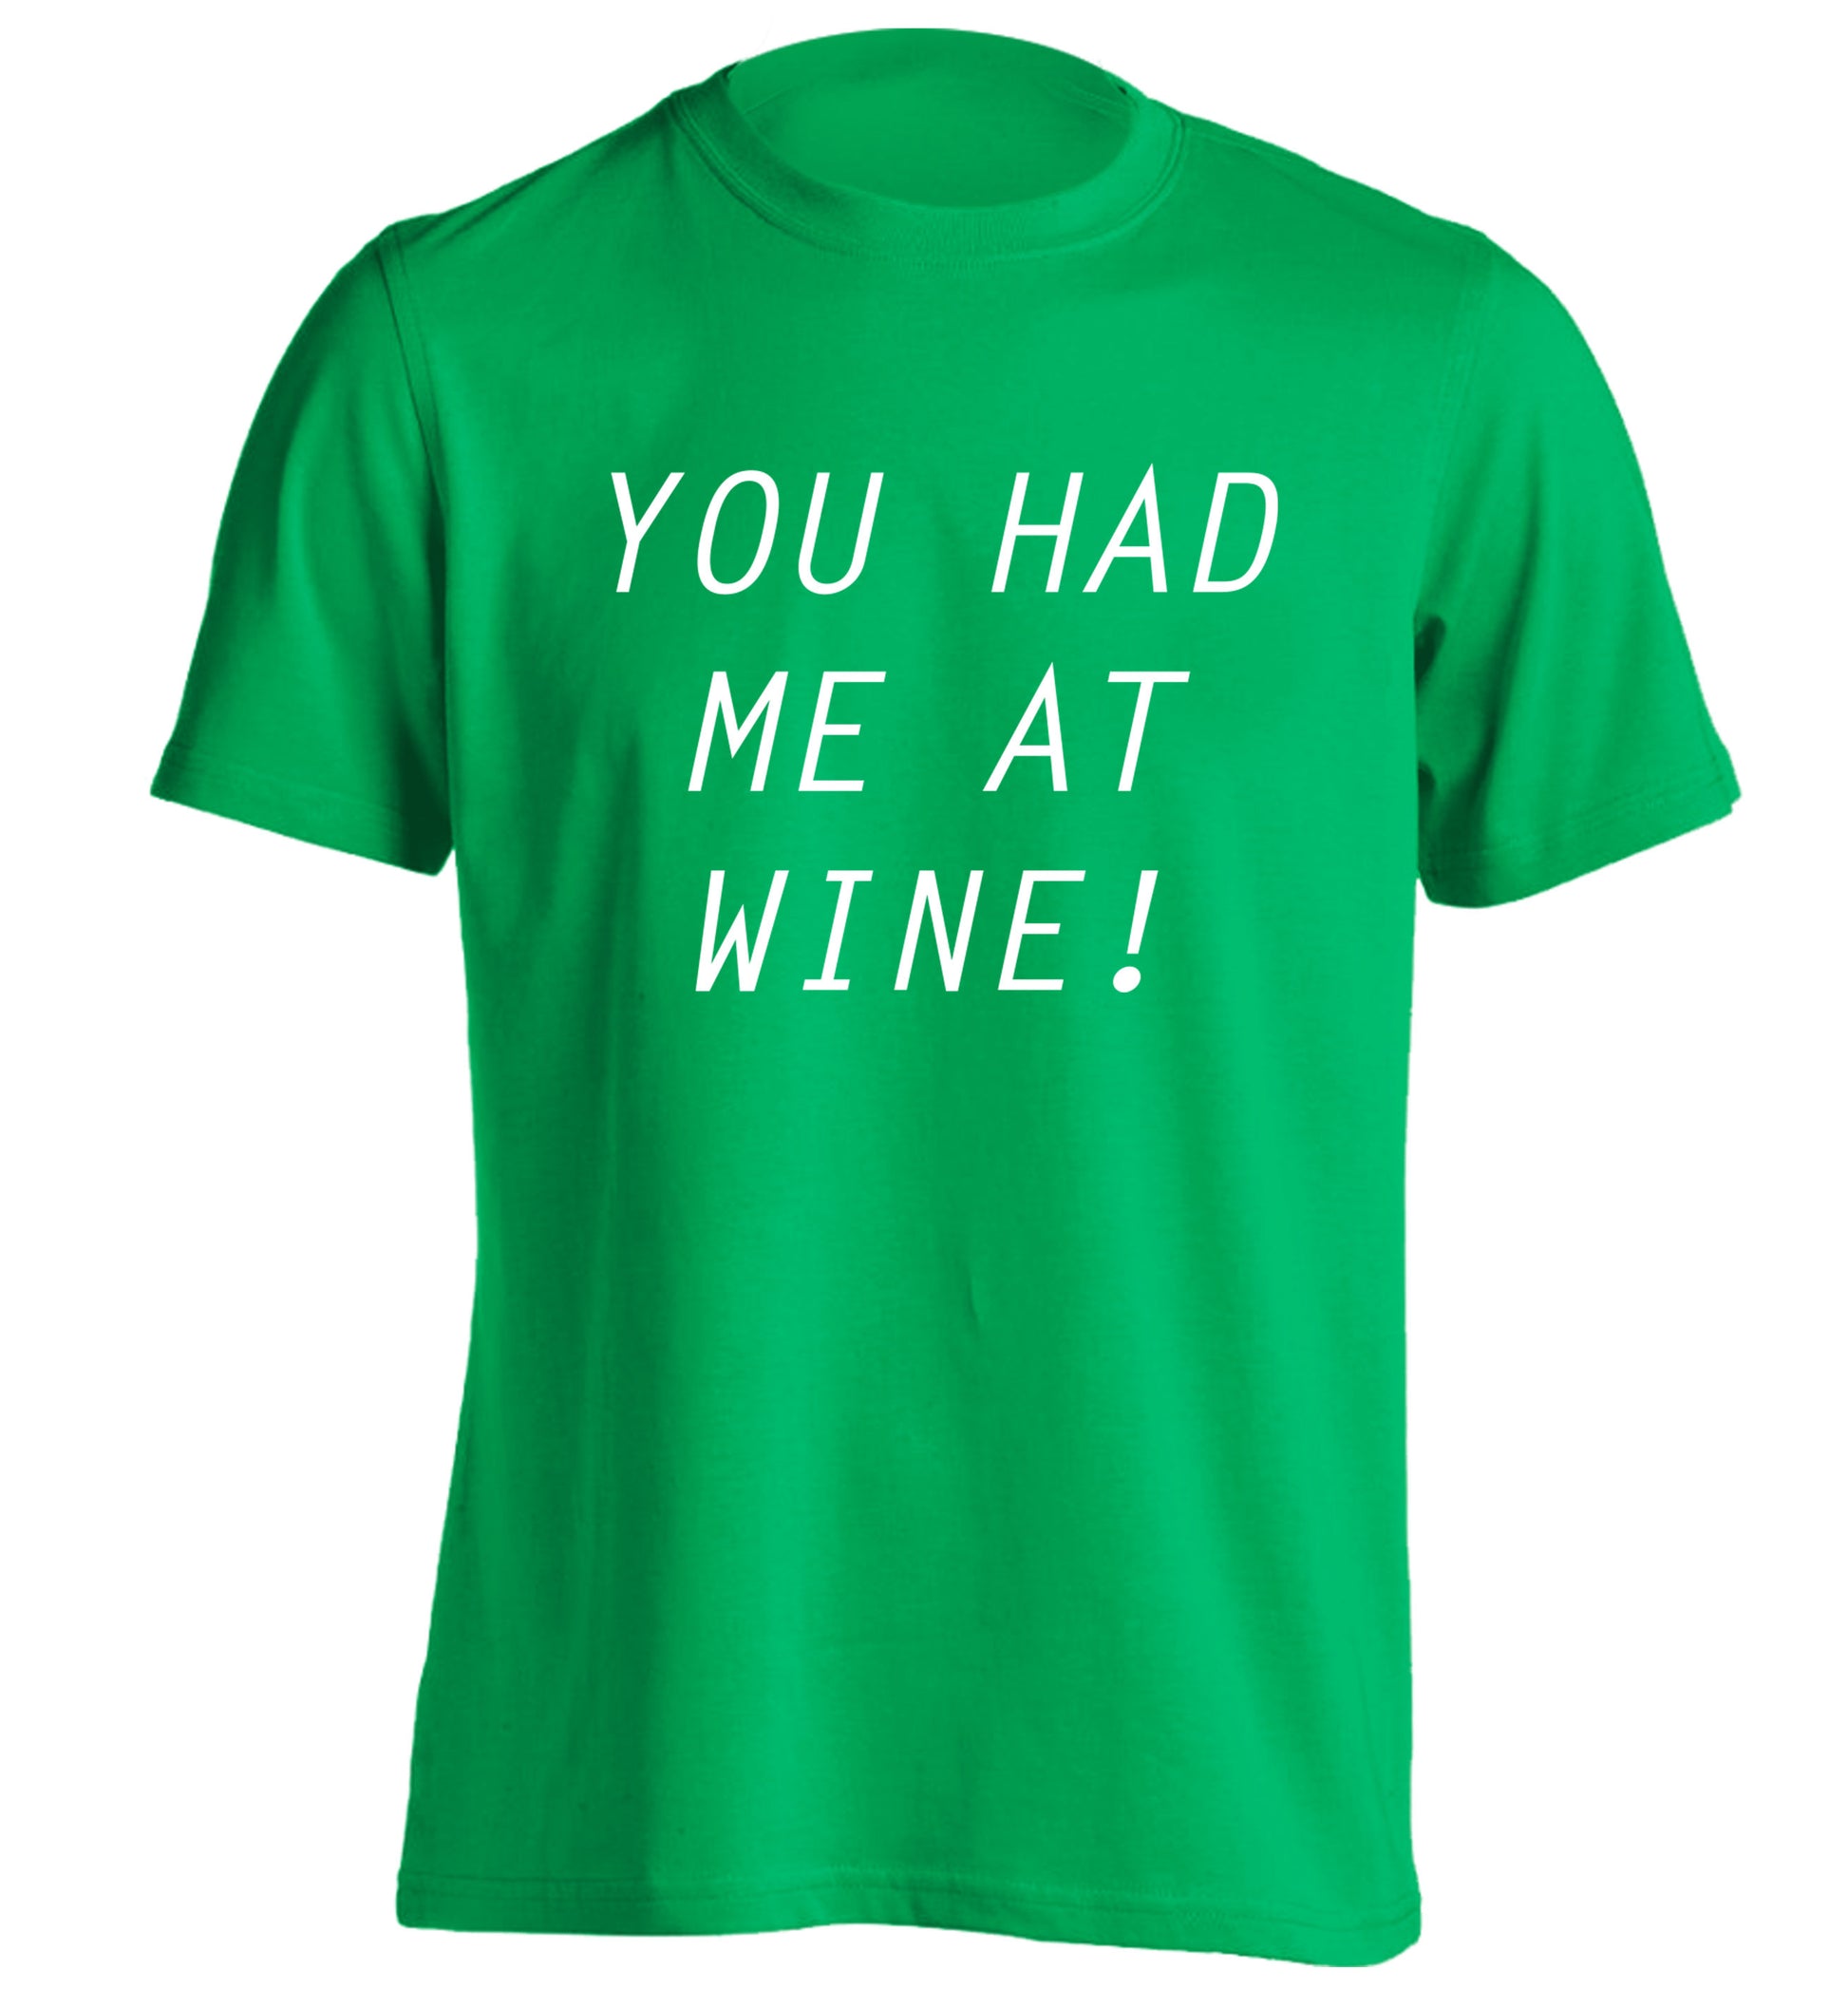 You had me at wine adults unisex green Tshirt 2XL